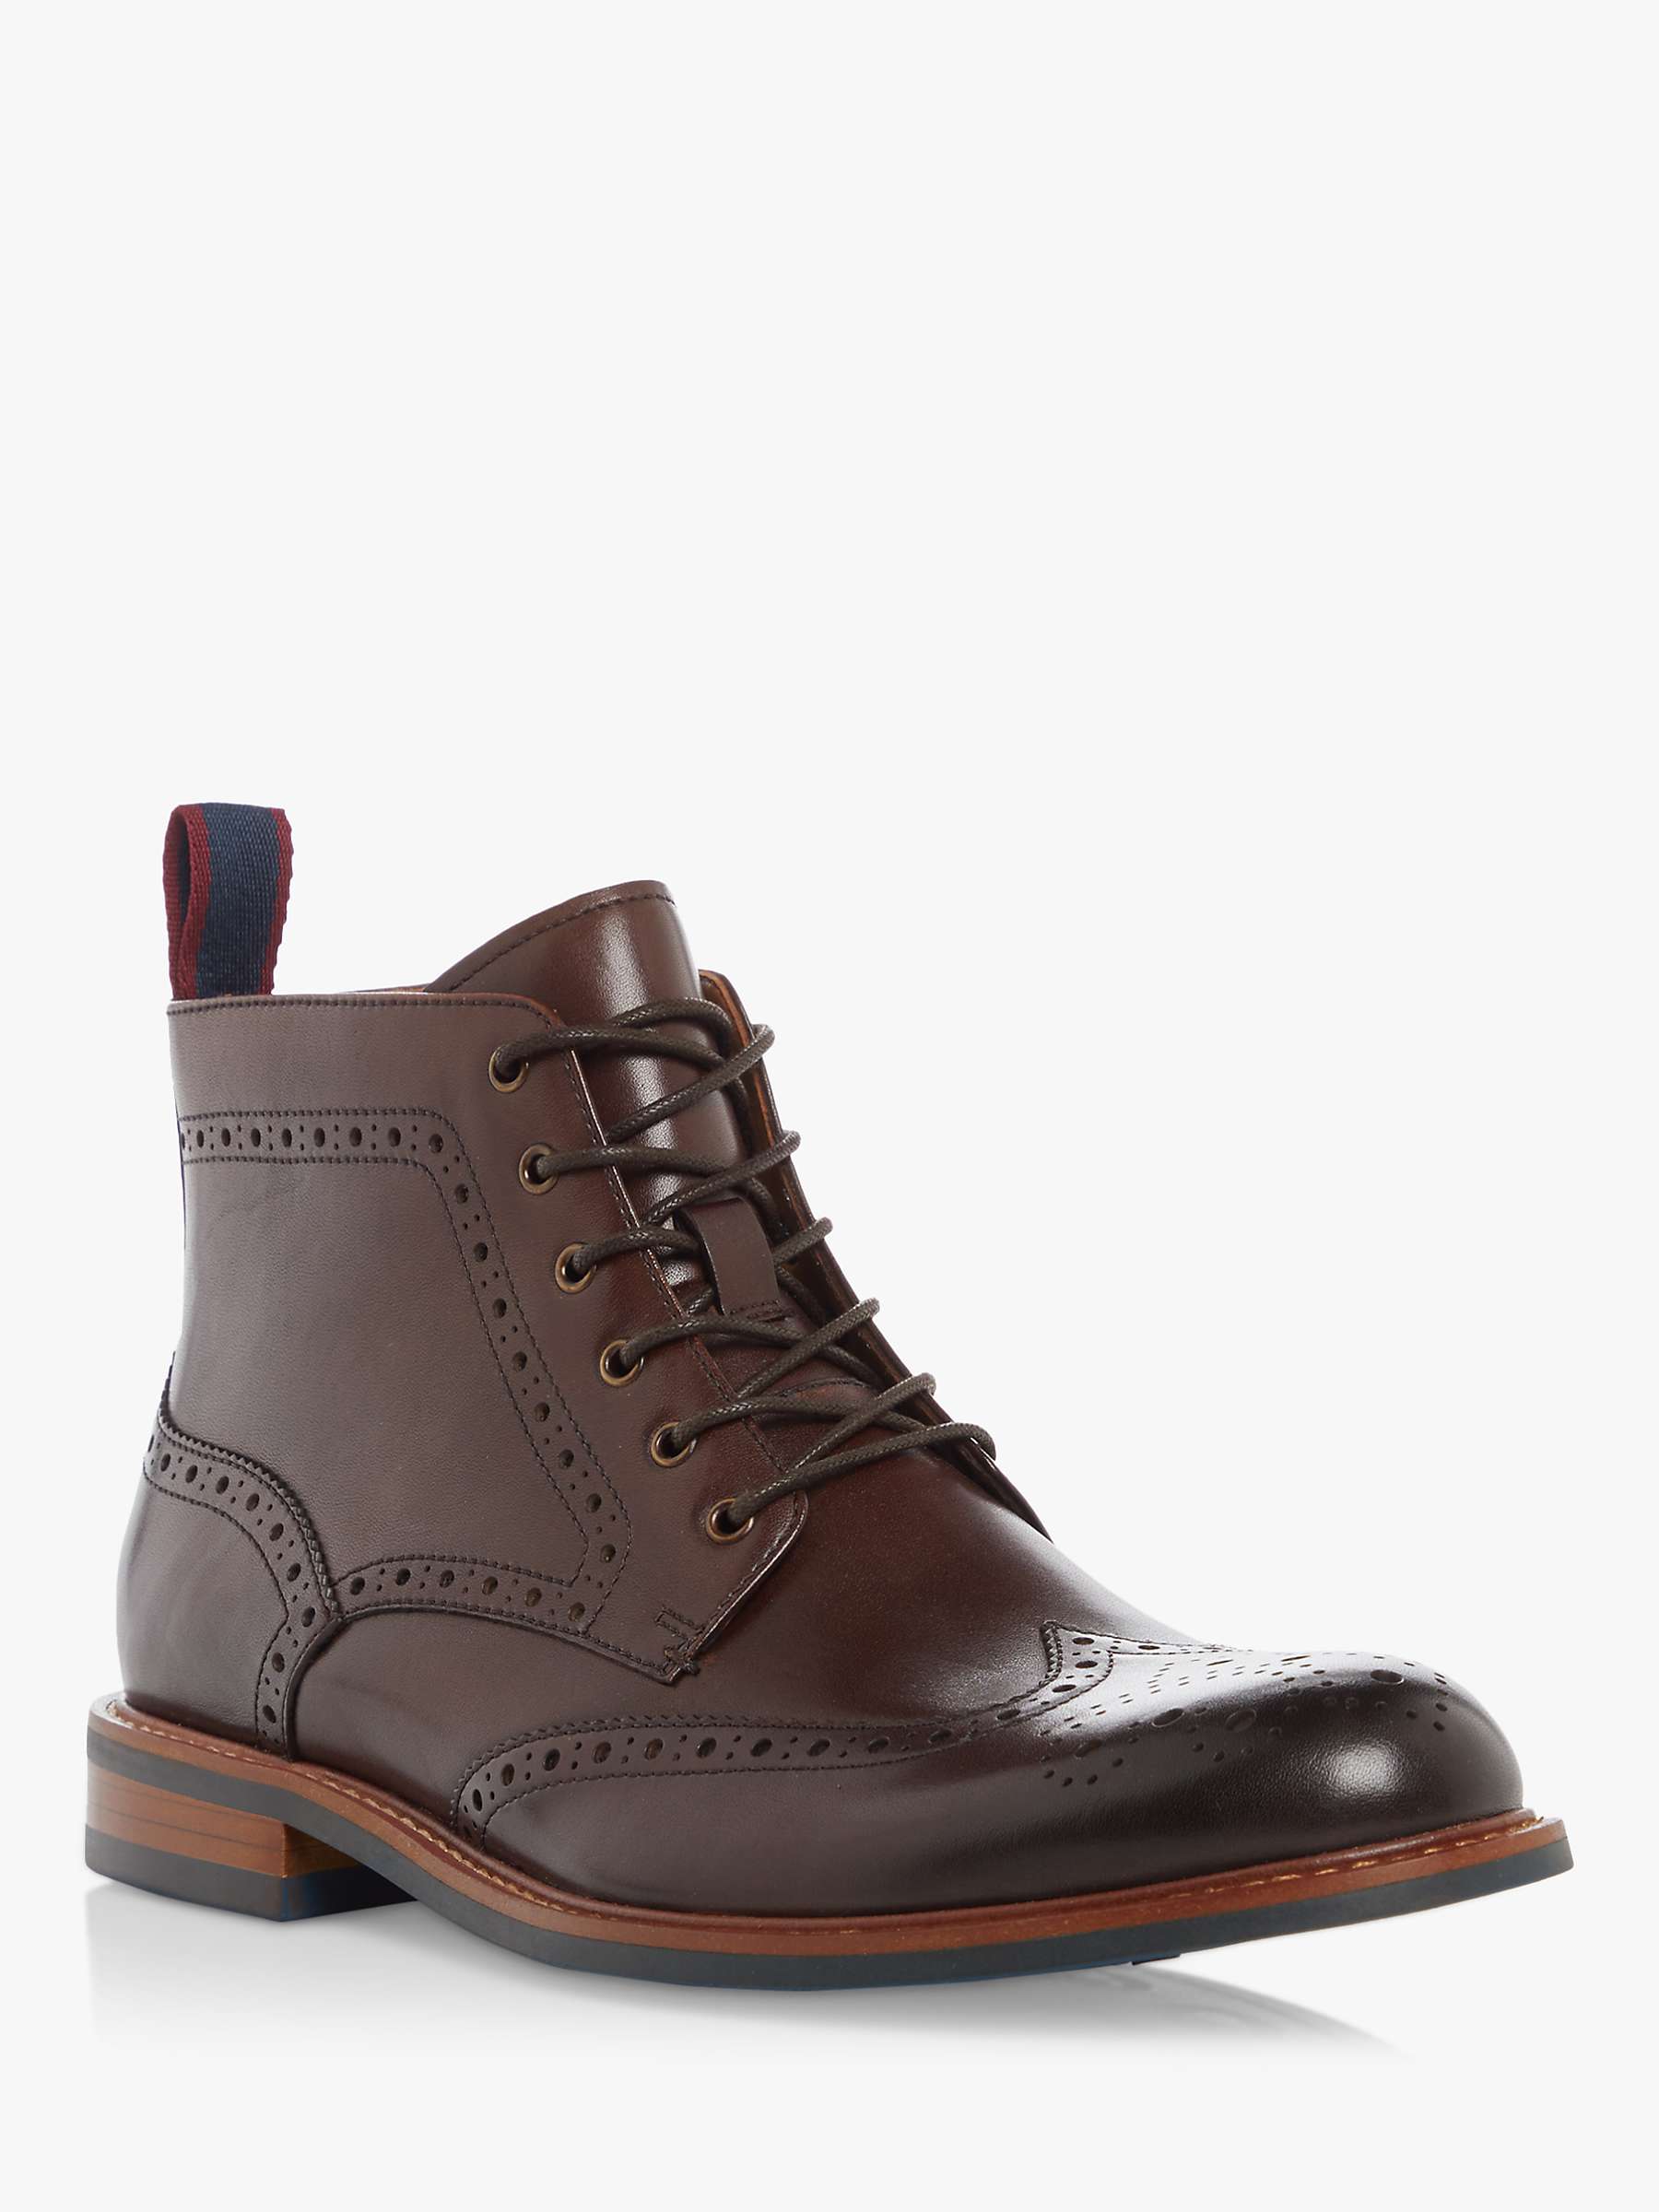 Buy Dune Morale Leather Boots Online at johnlewis.com